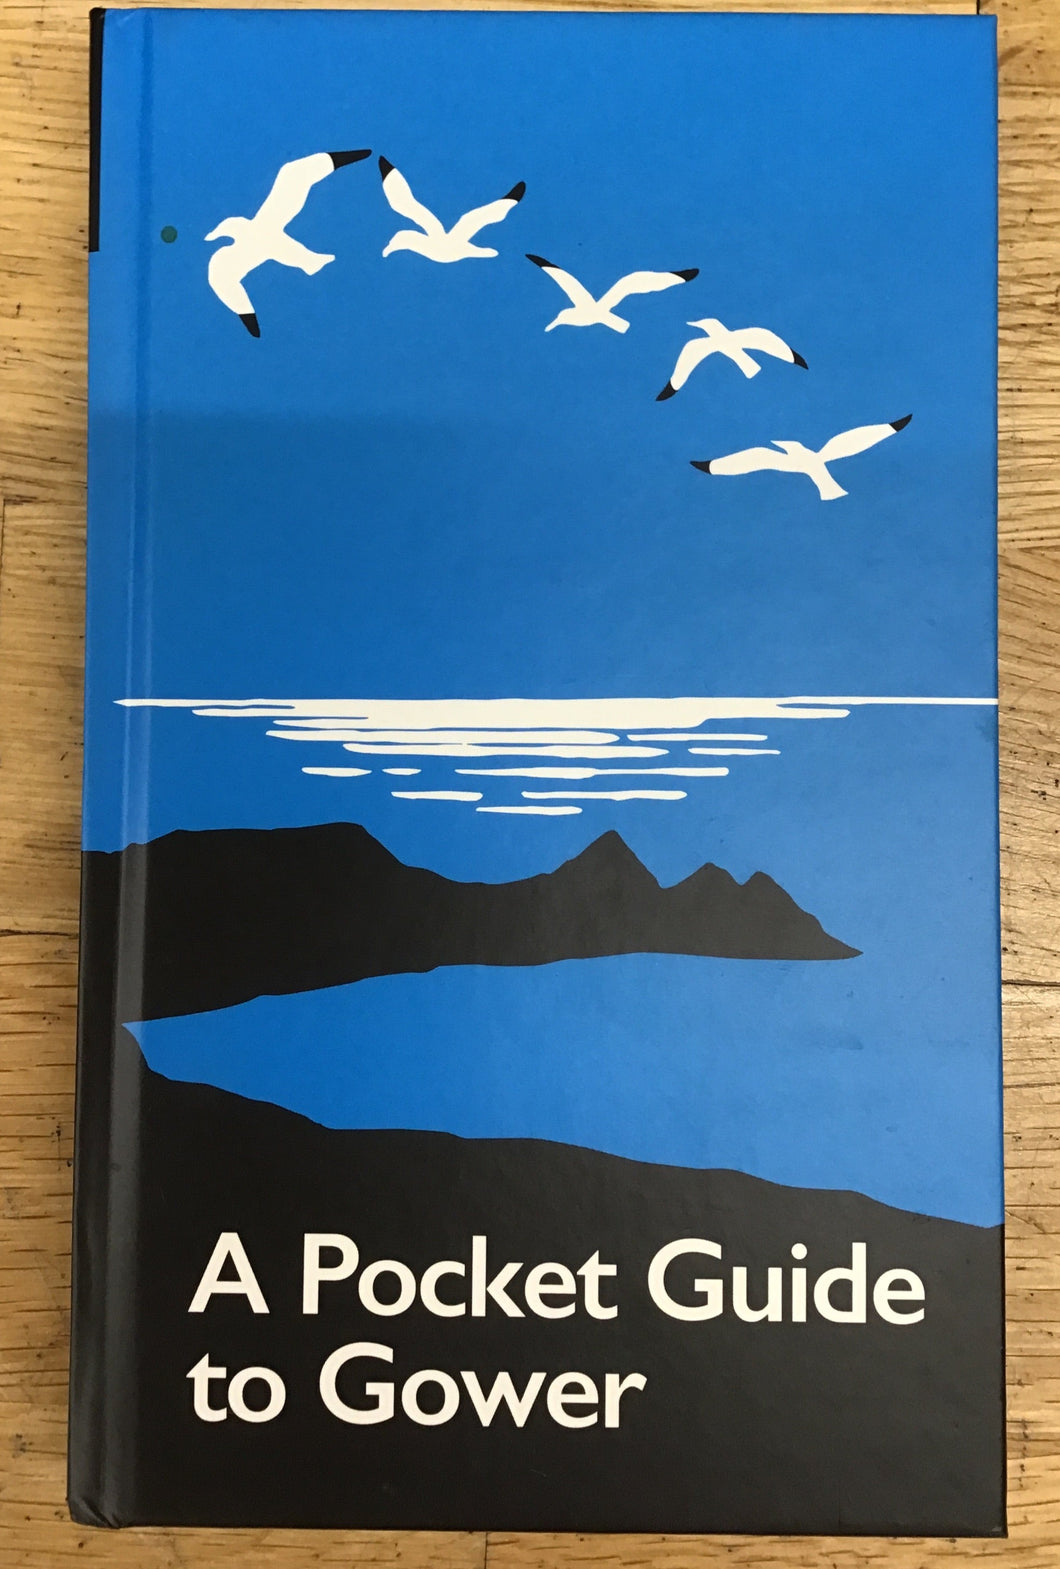 A pocket guide to Gower